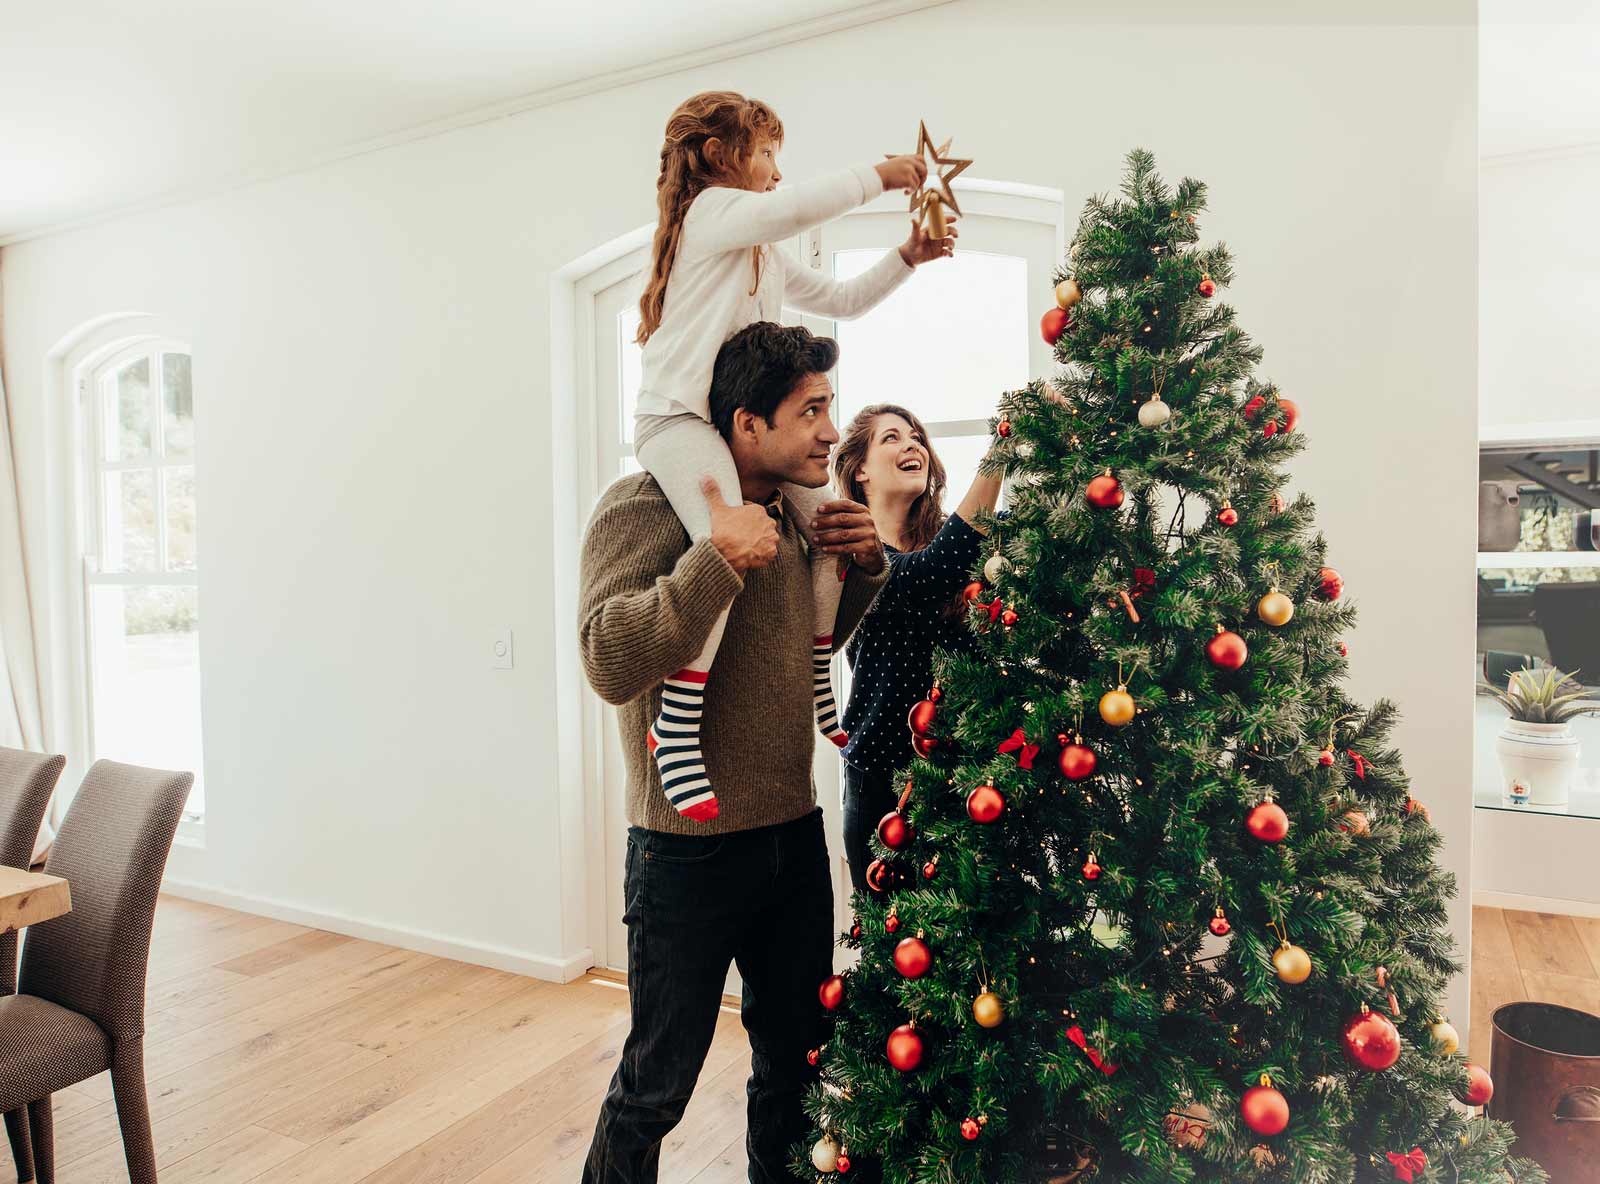 A family prepares their Christmas tree for the holidays.